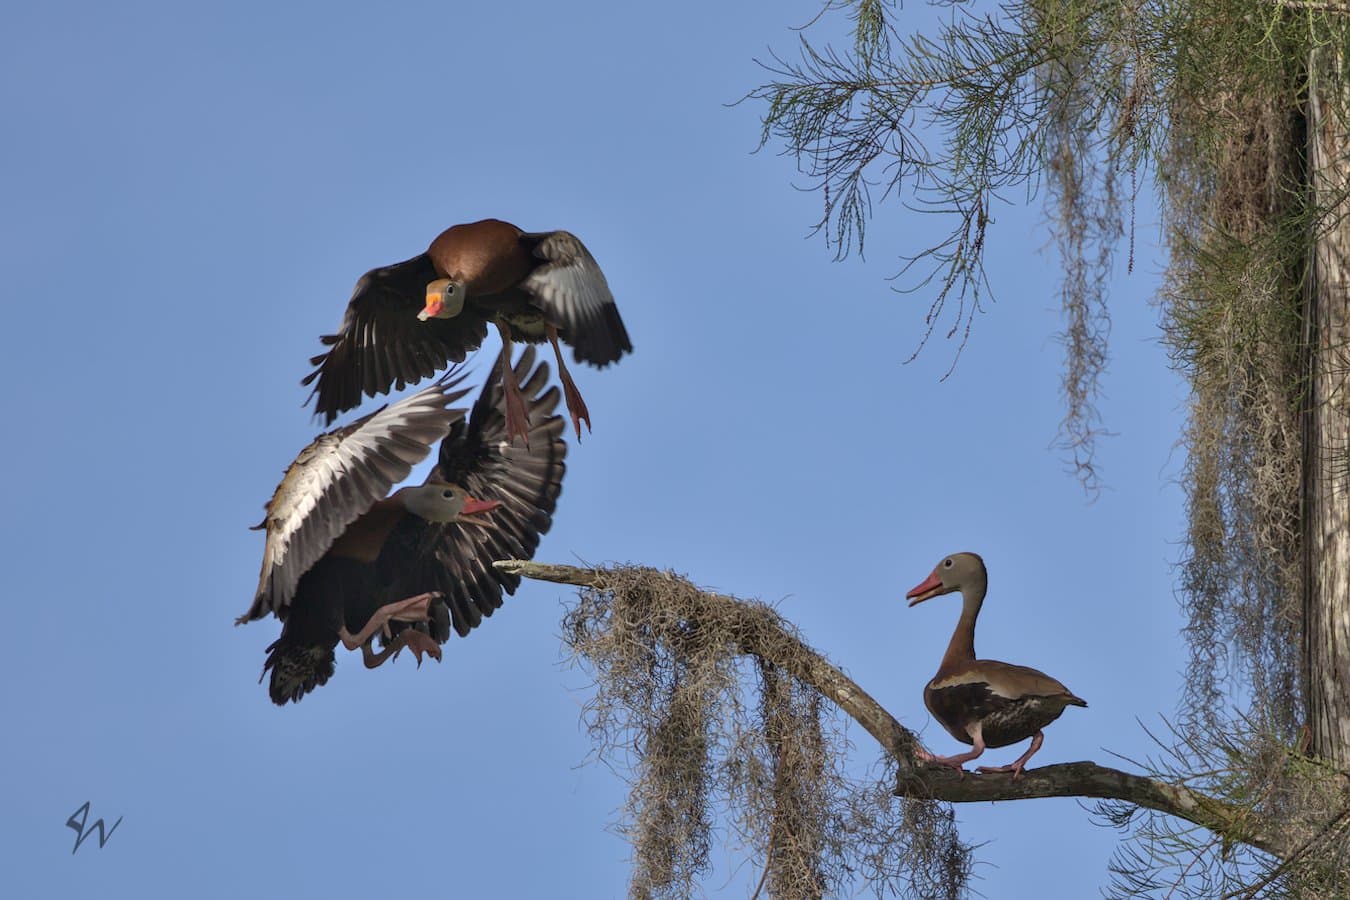 Black-bellied Whistling Duck divebombs another while another watches upon high branch.